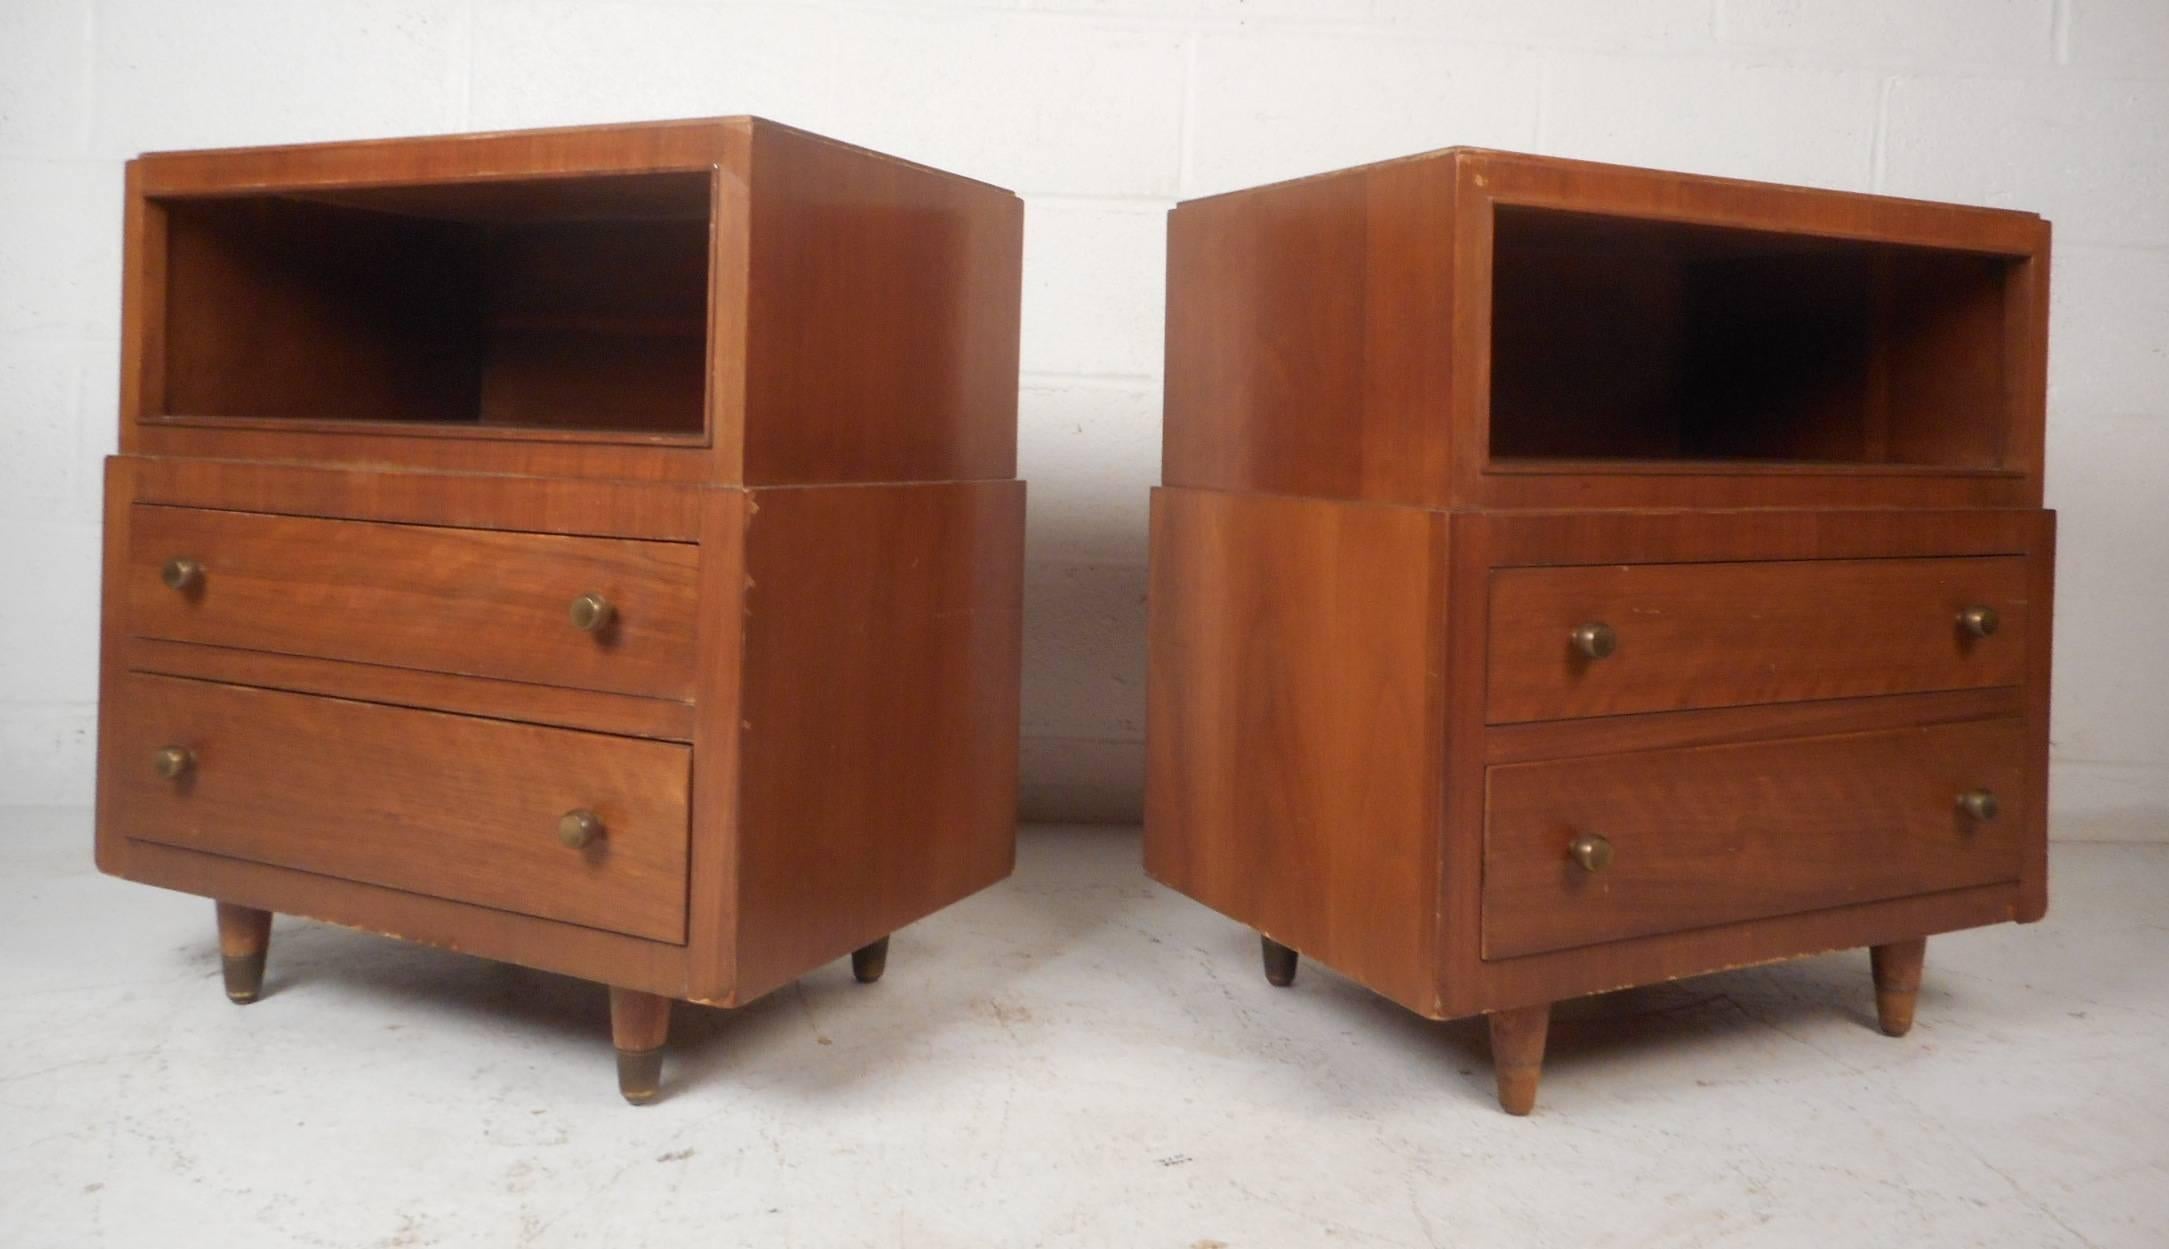 Stunning pair of Mid-Century Modern end tables by John Stuart with a vintage walnut finish and round brass drawer pulls. Stylish design features a compartment for storage on the top and two drawers on the bottom. These unique pieces have brass